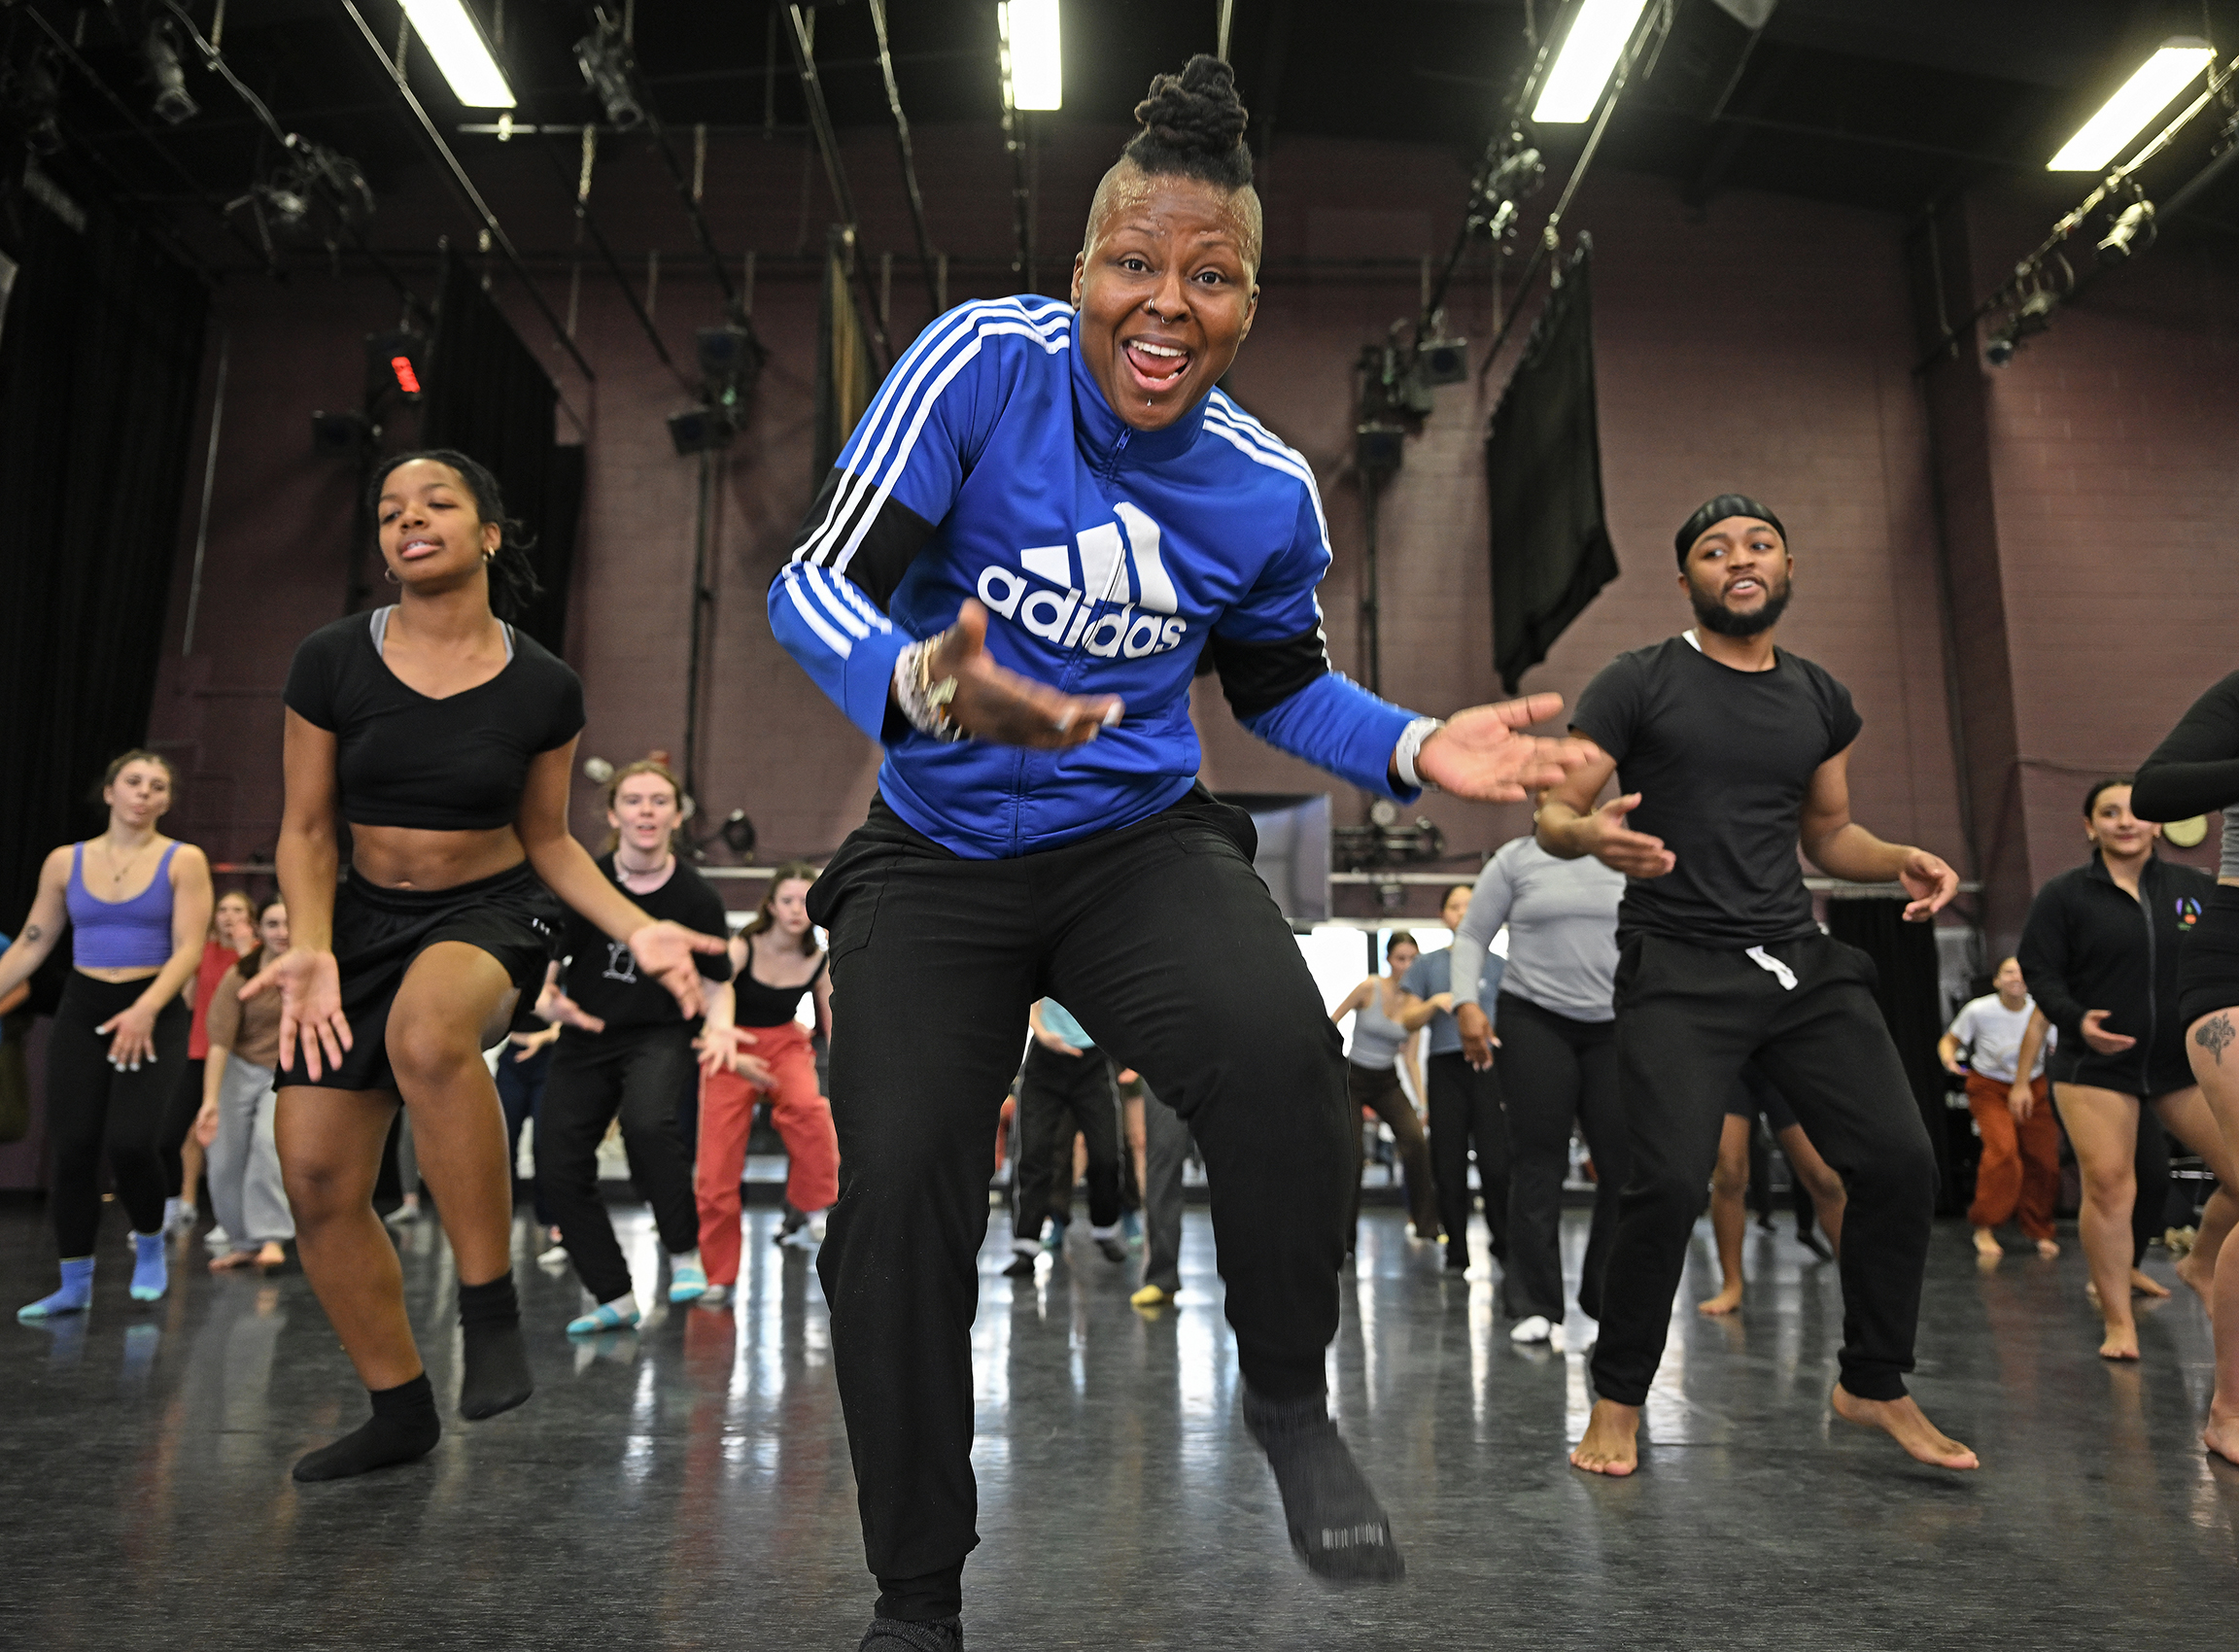 Dance instructor leads class in crowded studio